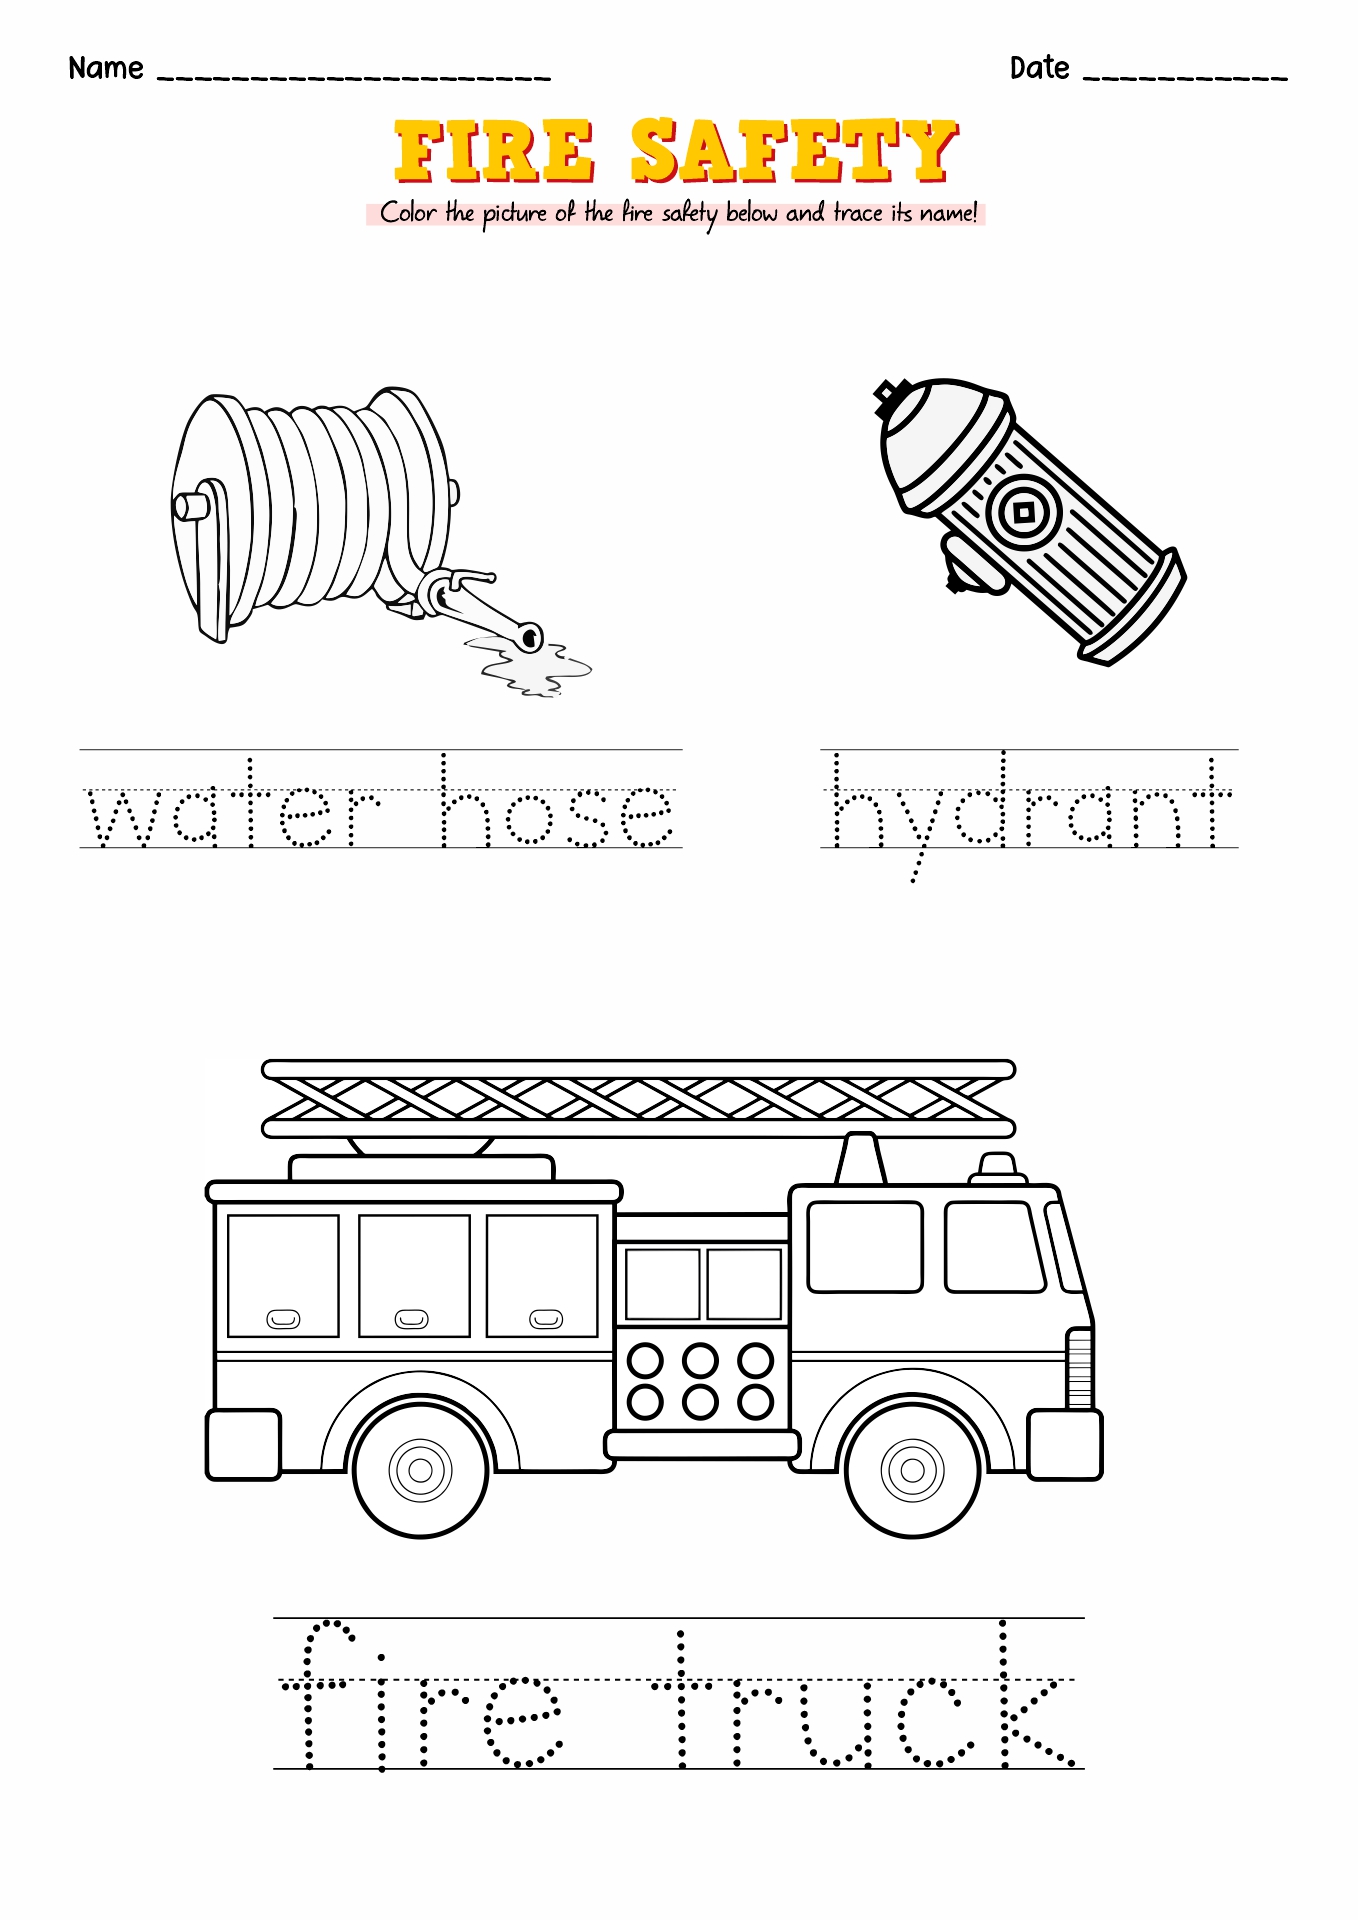 Fire Safety Activities for Kids Worksheets Image